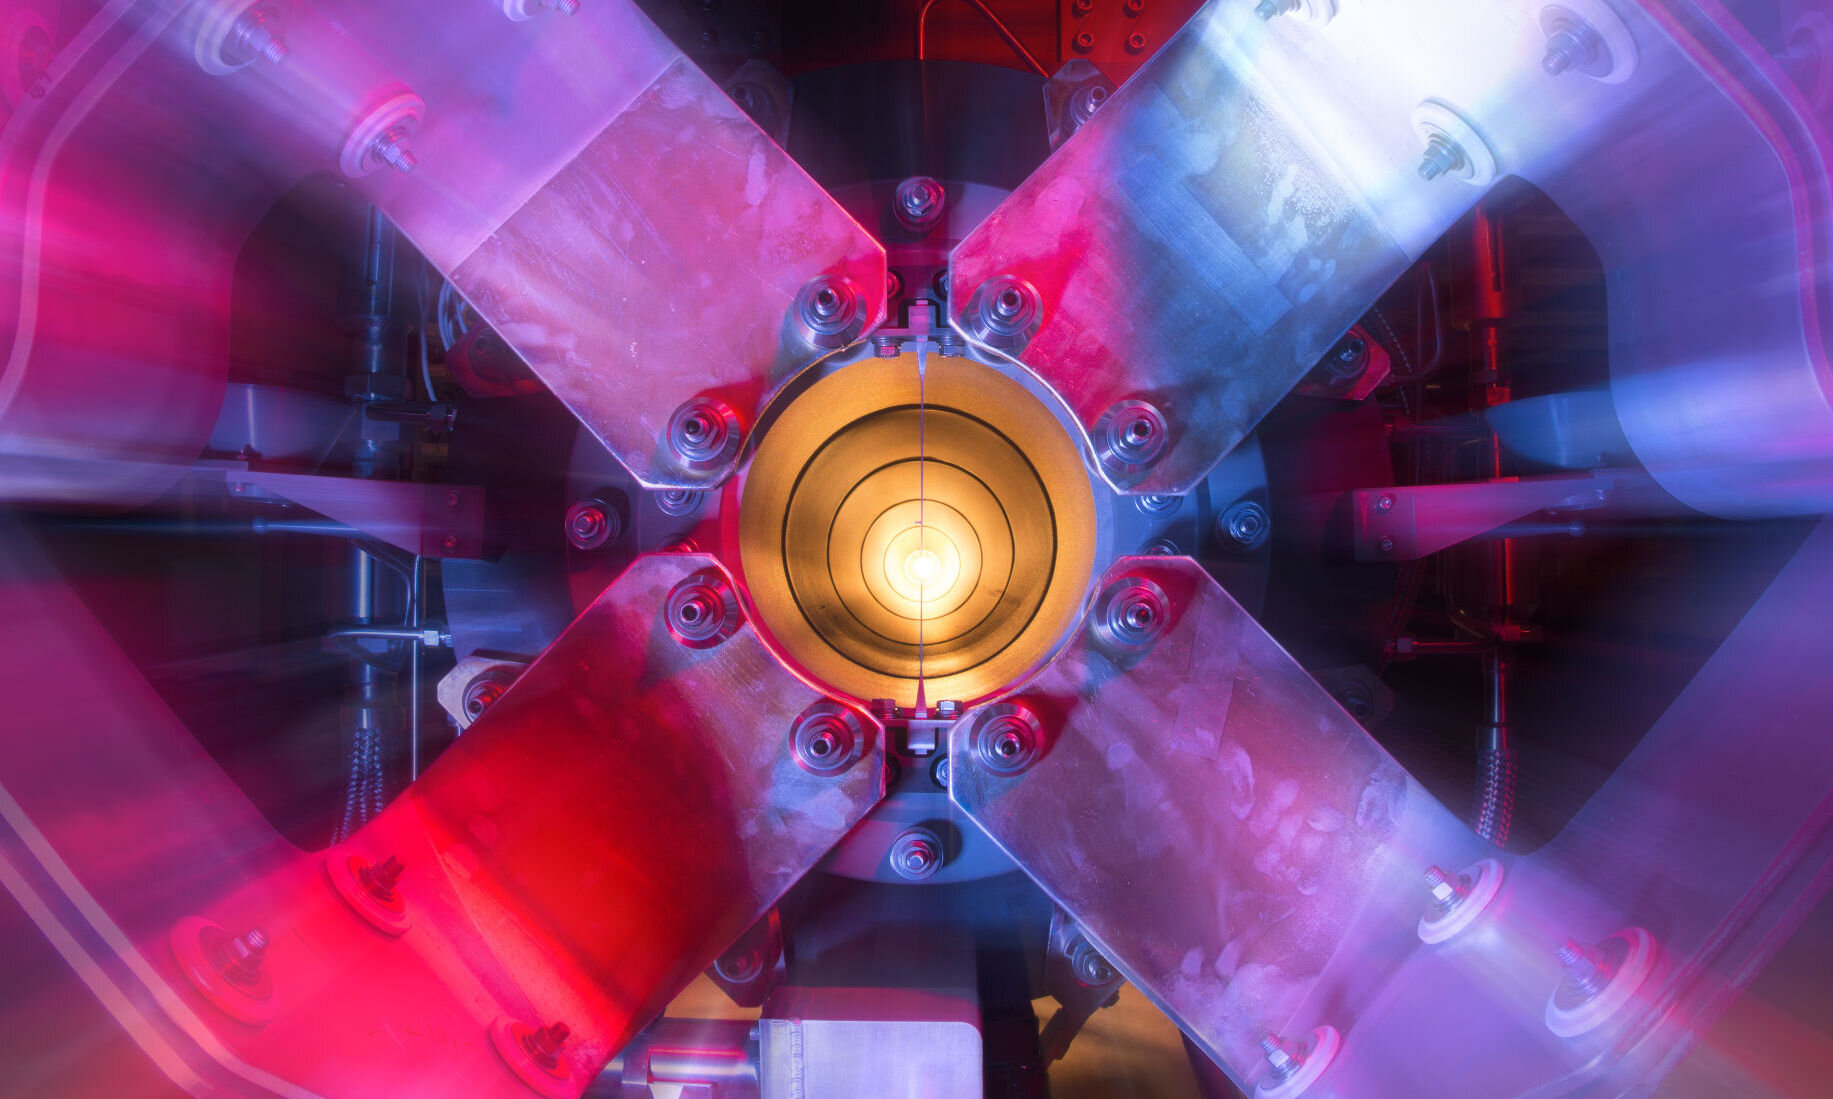 'Ghostly' neutrinos provide new path to study protons - Phys.org